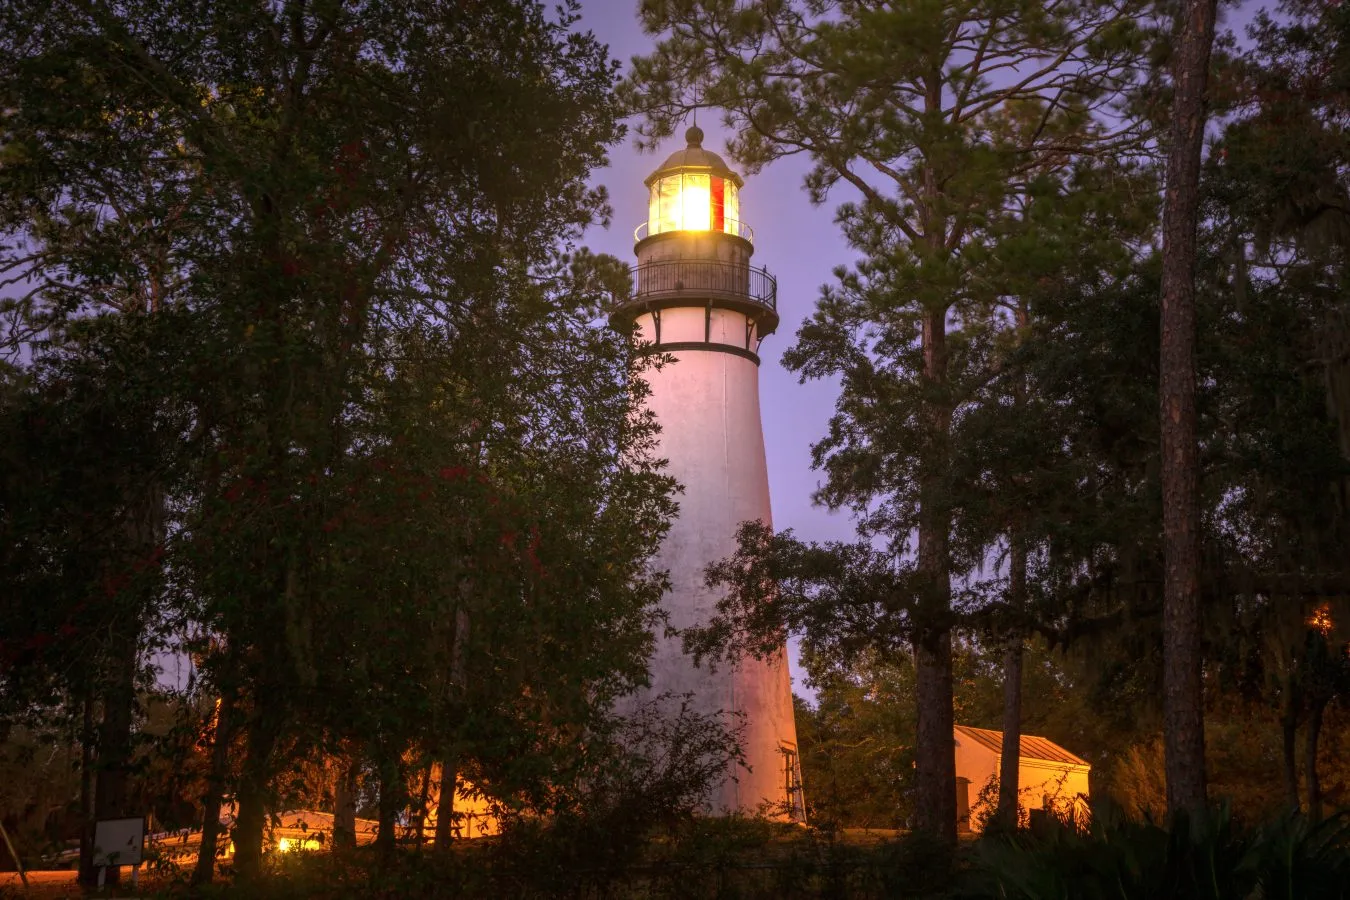 amelia island lighthouse lit up at night, as seen through trees in one of the best east coast beach towns